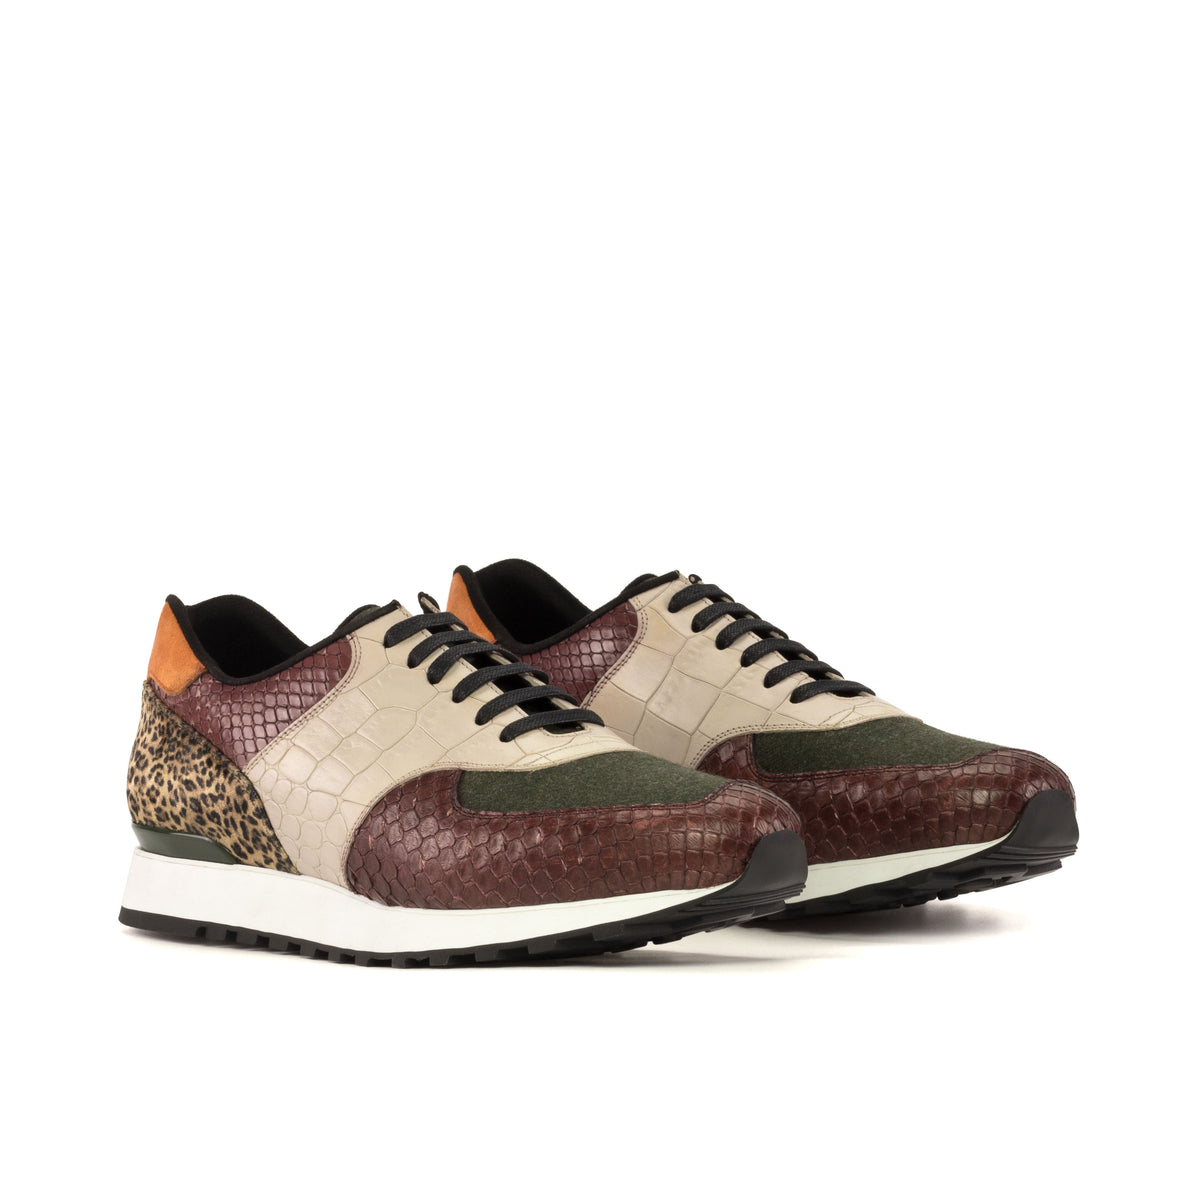 Snake Skin Olive Sneakers the Python Martini Leather 